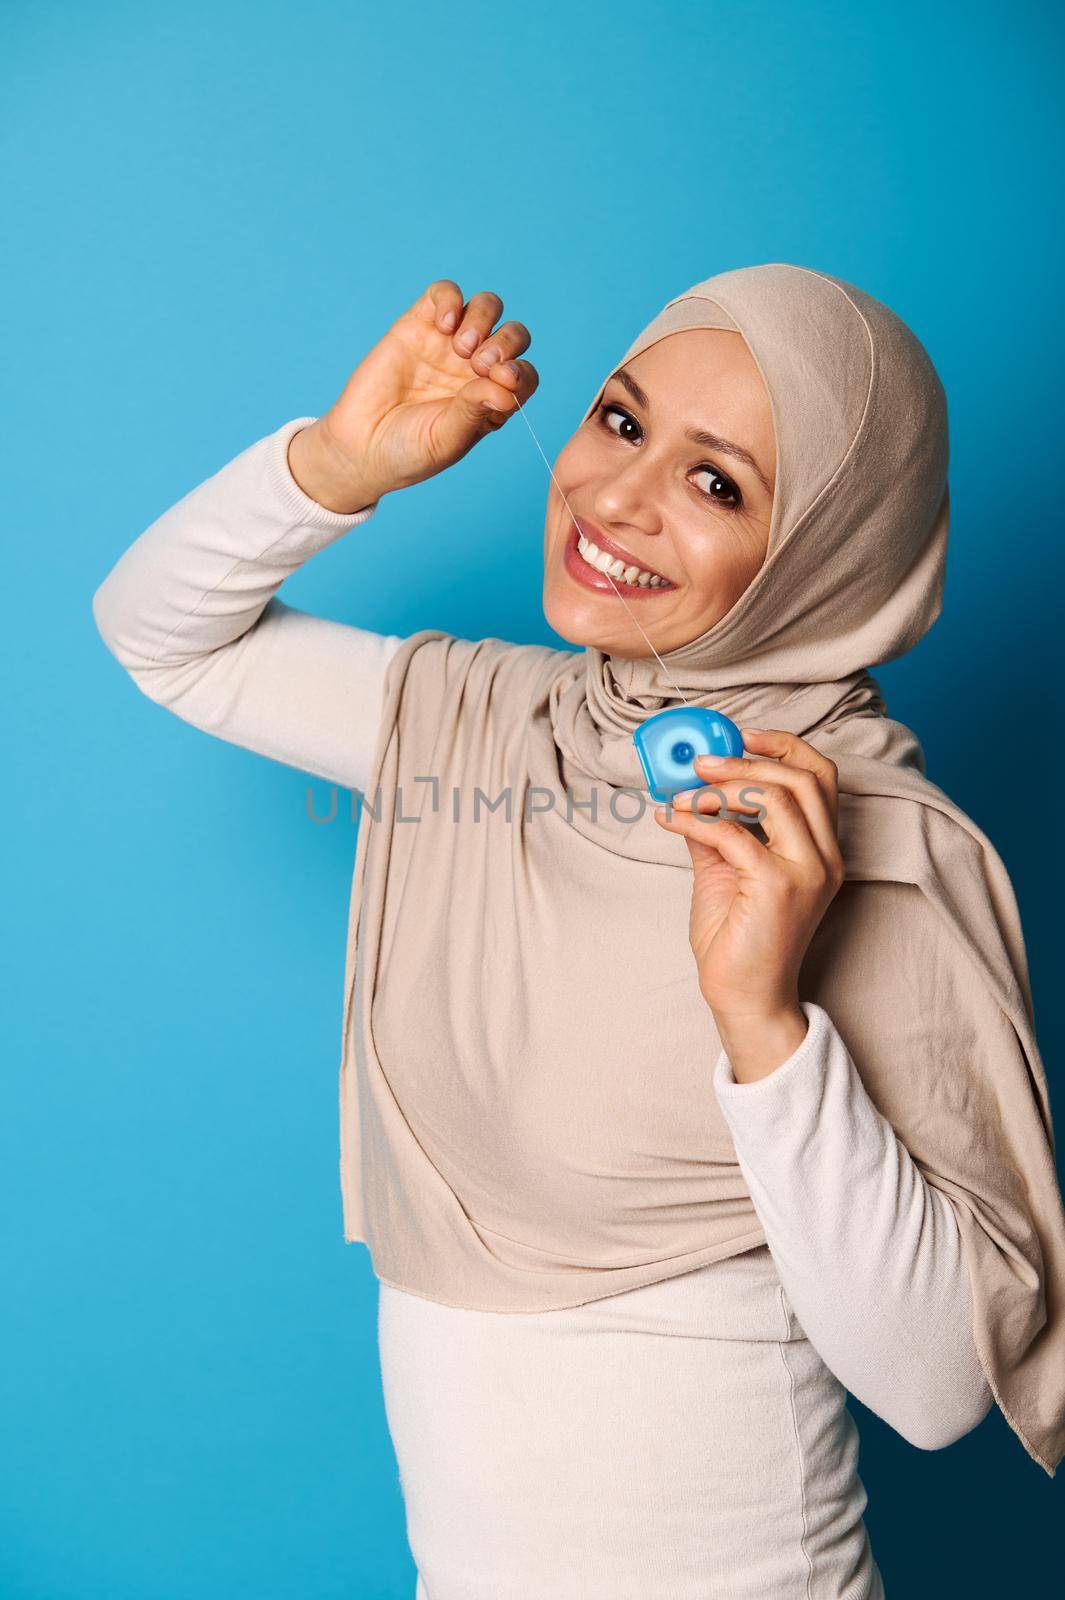 Oriental woman in hijab smiles toothy smile at camera and uses a dental floss by artgf